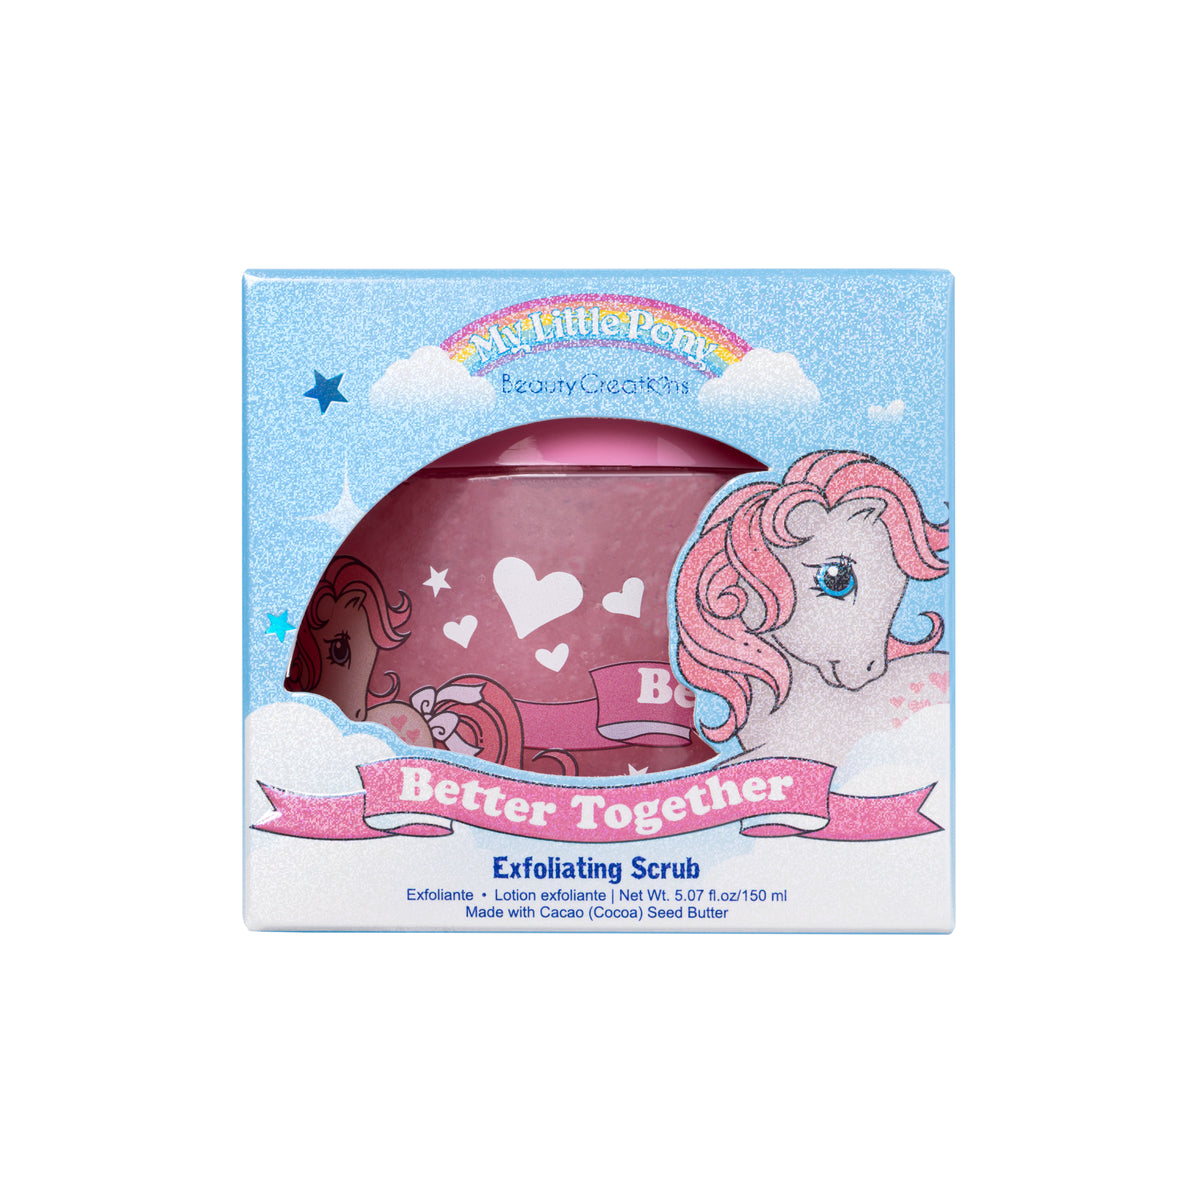 "BETTER  TOGETHER" FLORAL BODY SCRUB MY LITTLE PONY - BEAUTY CREATIONS